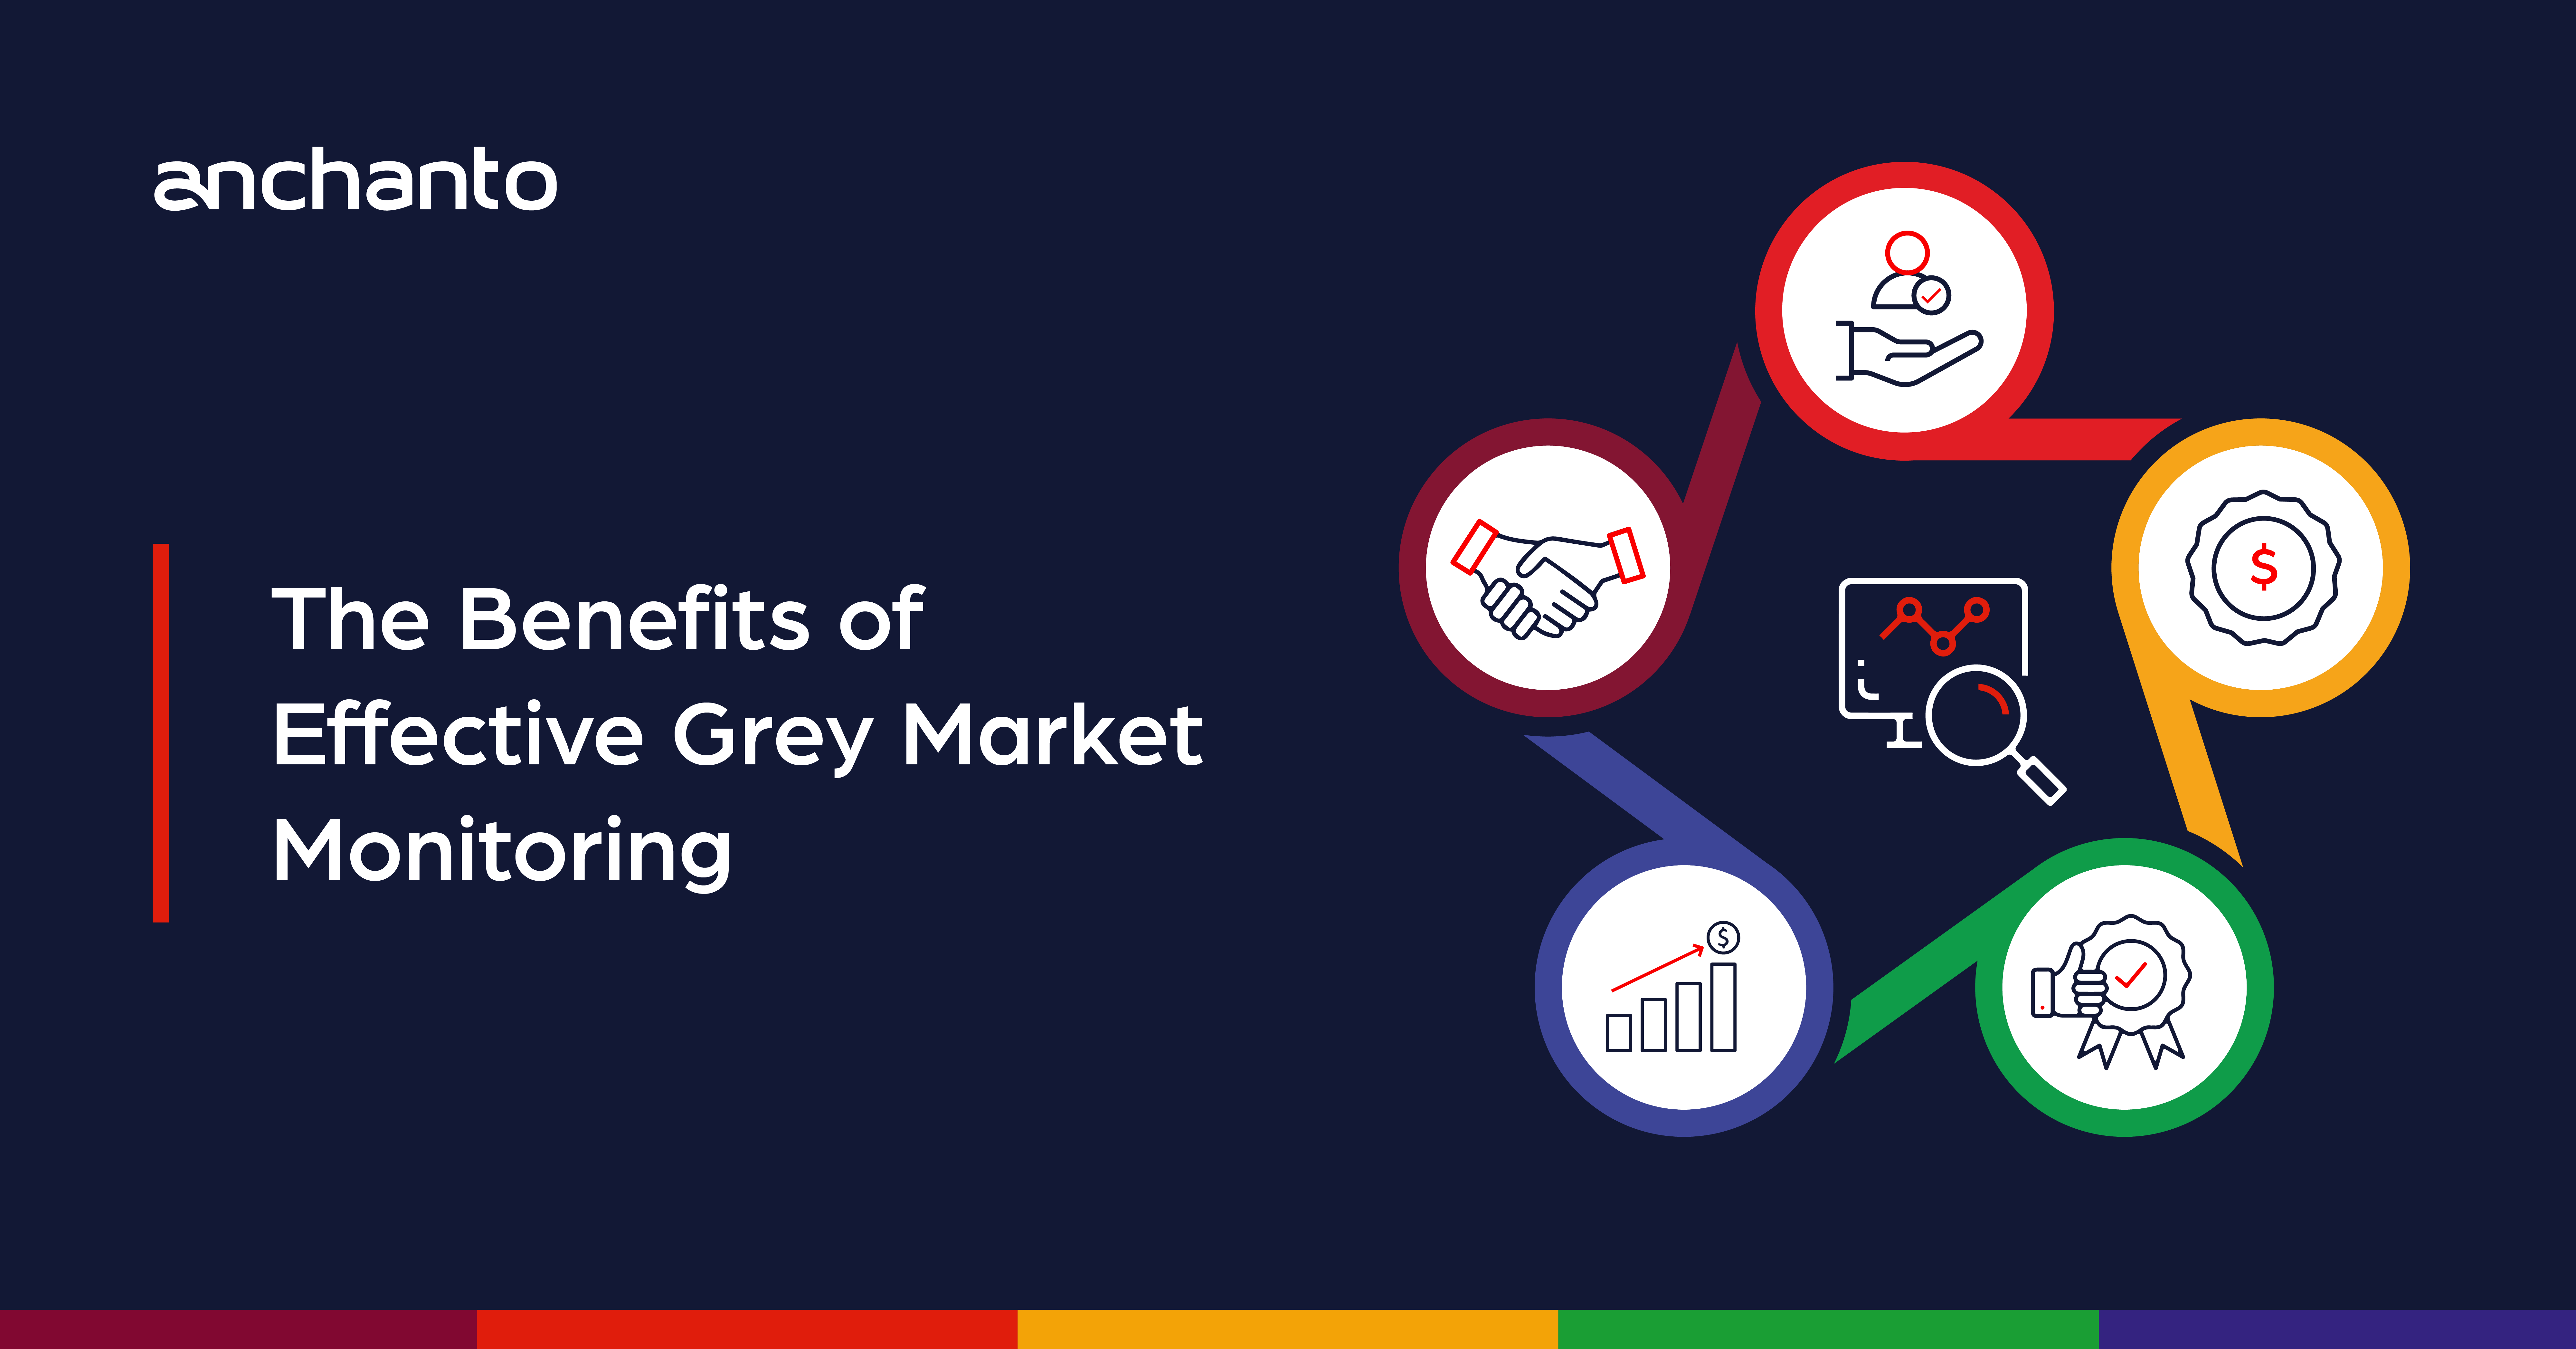 The Benefits of Effective Grey Market Monitoring